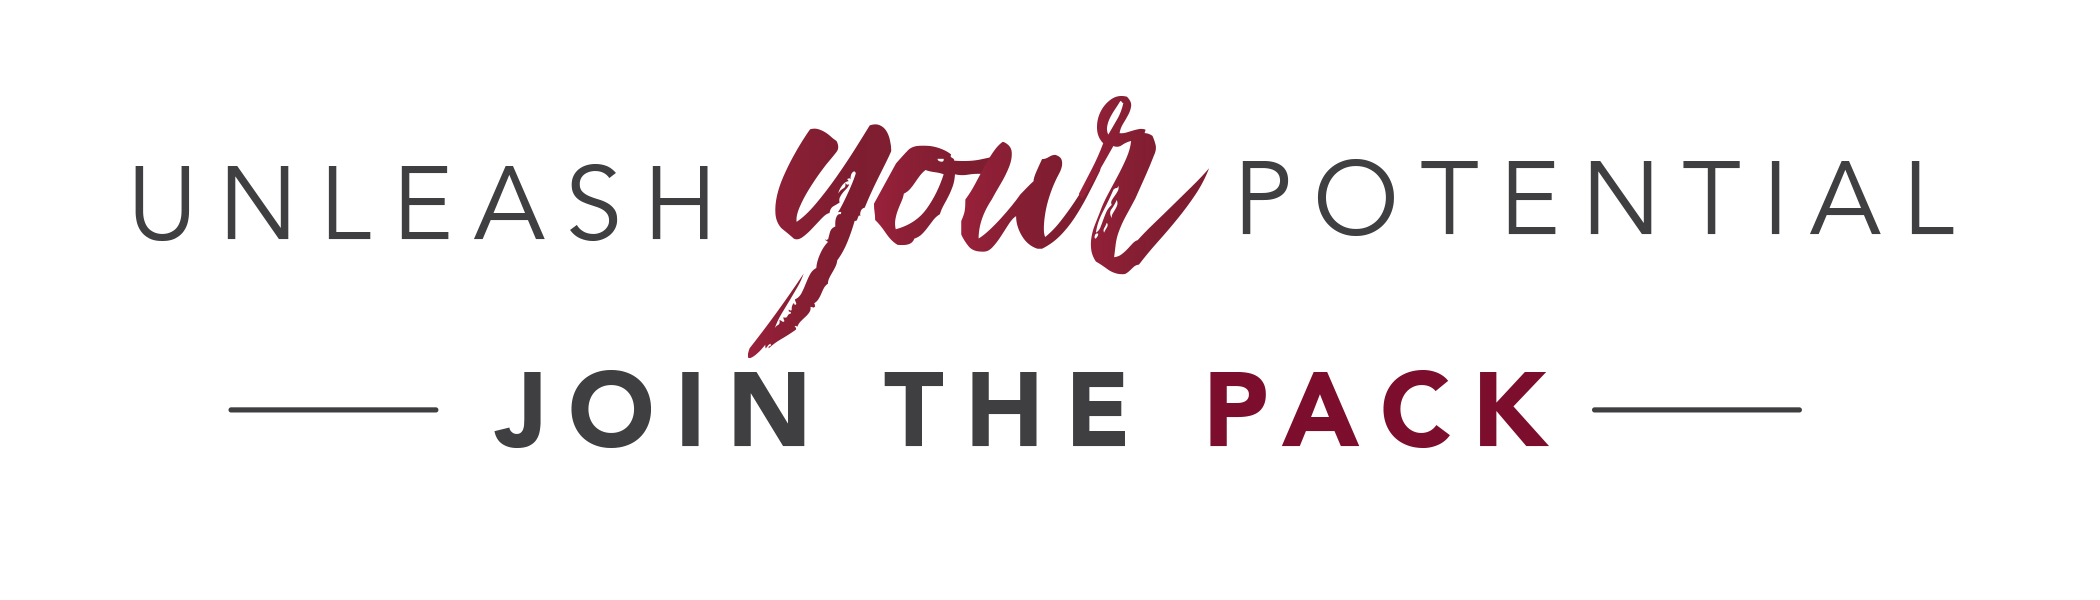 NSU's tagline: "Unleash Your Potential - Join the Pack"